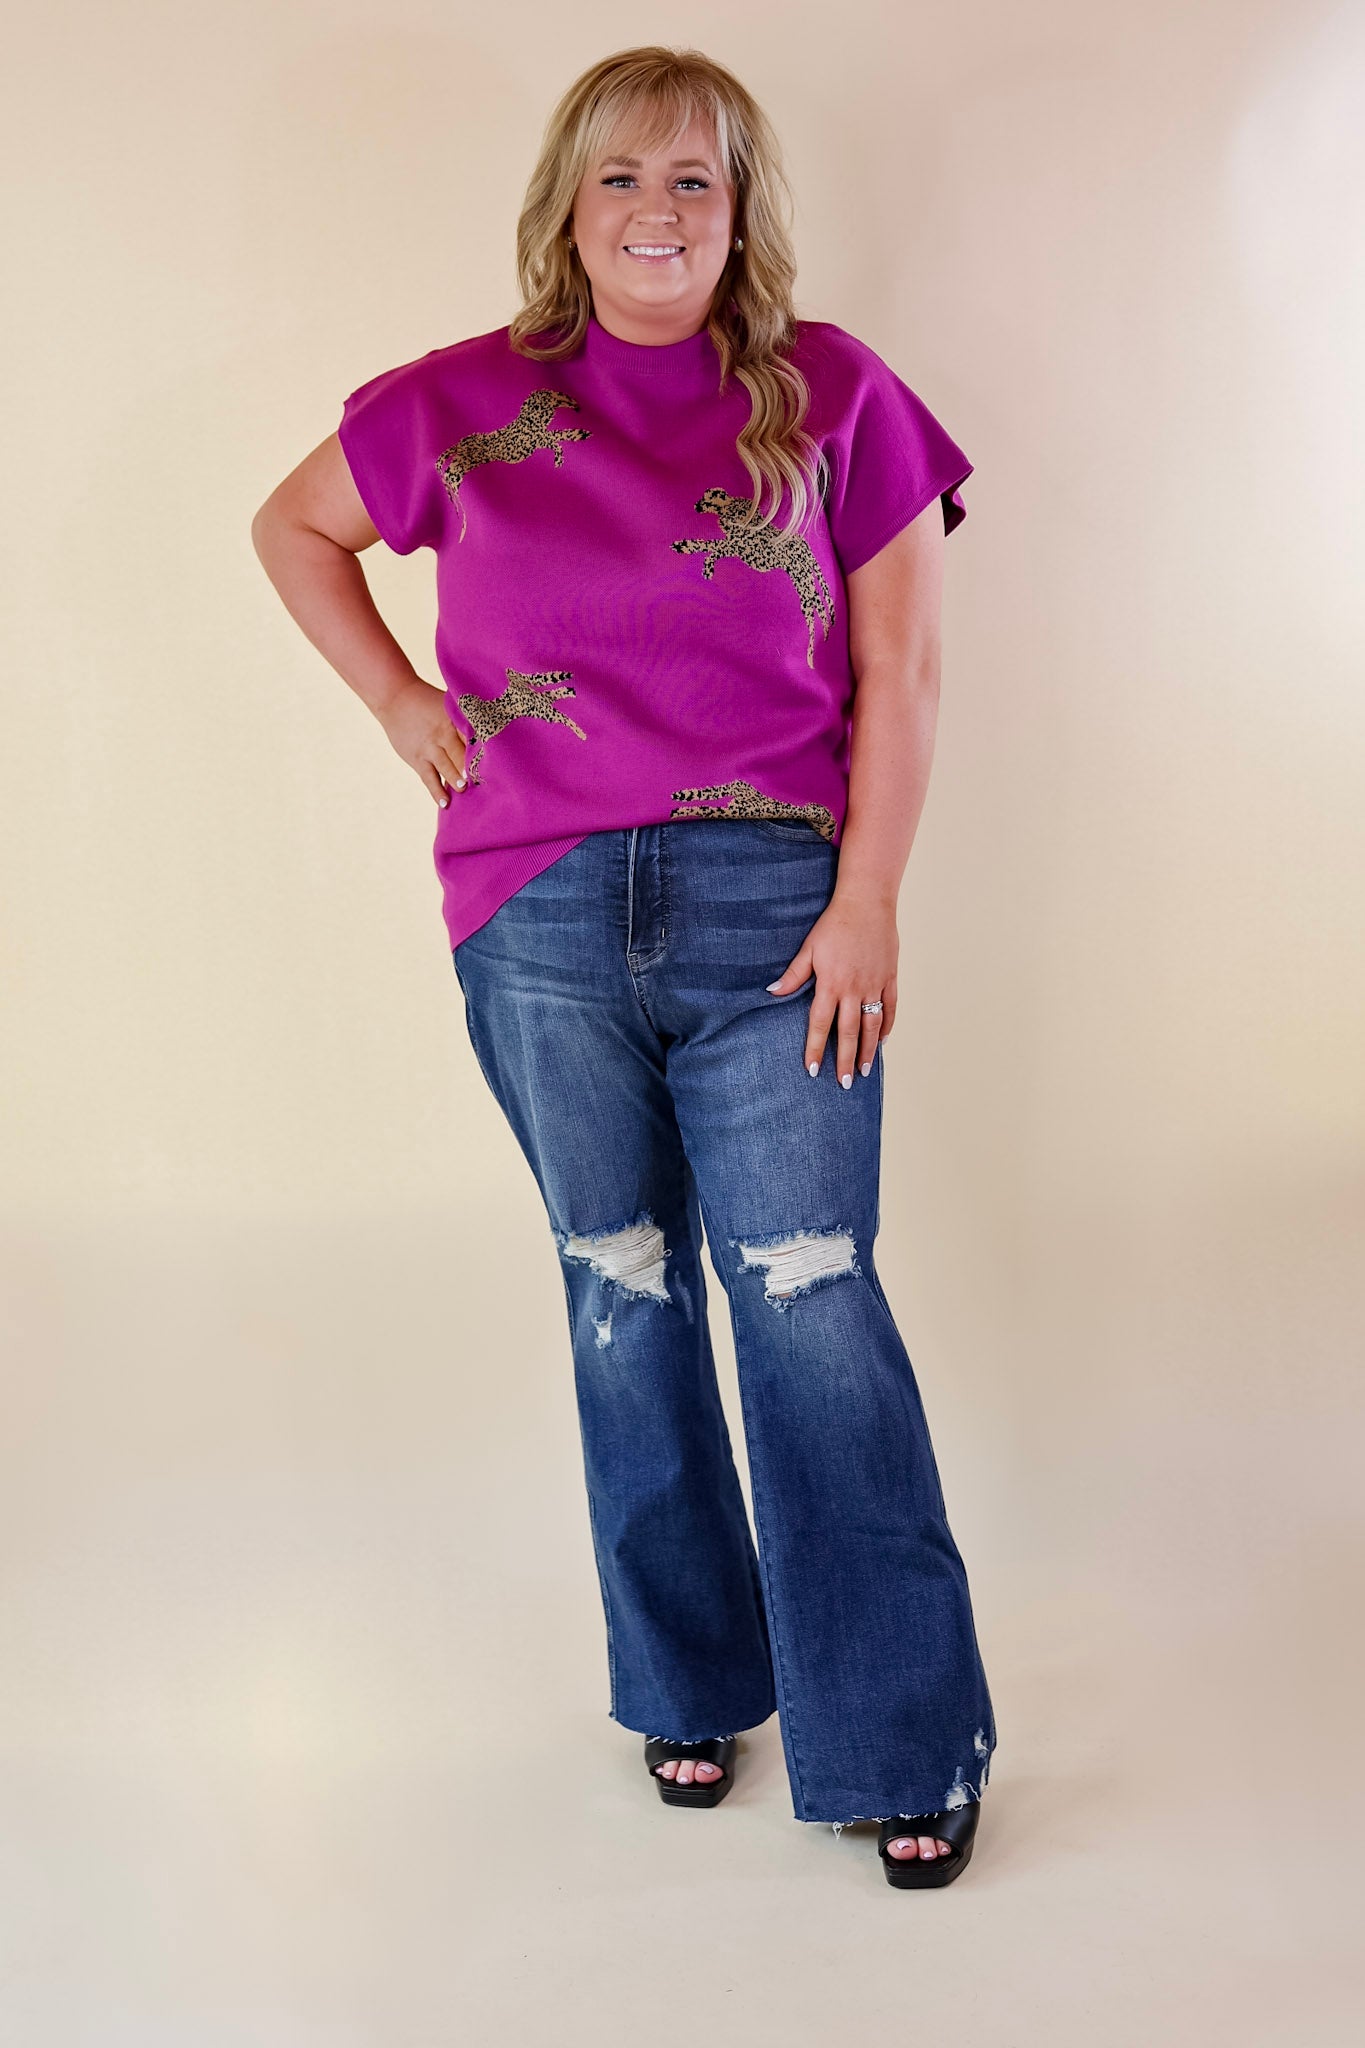 Upscale Charm Cheetah Print Sweater Top in Magenta Purple - Giddy Up Glamour Boutique